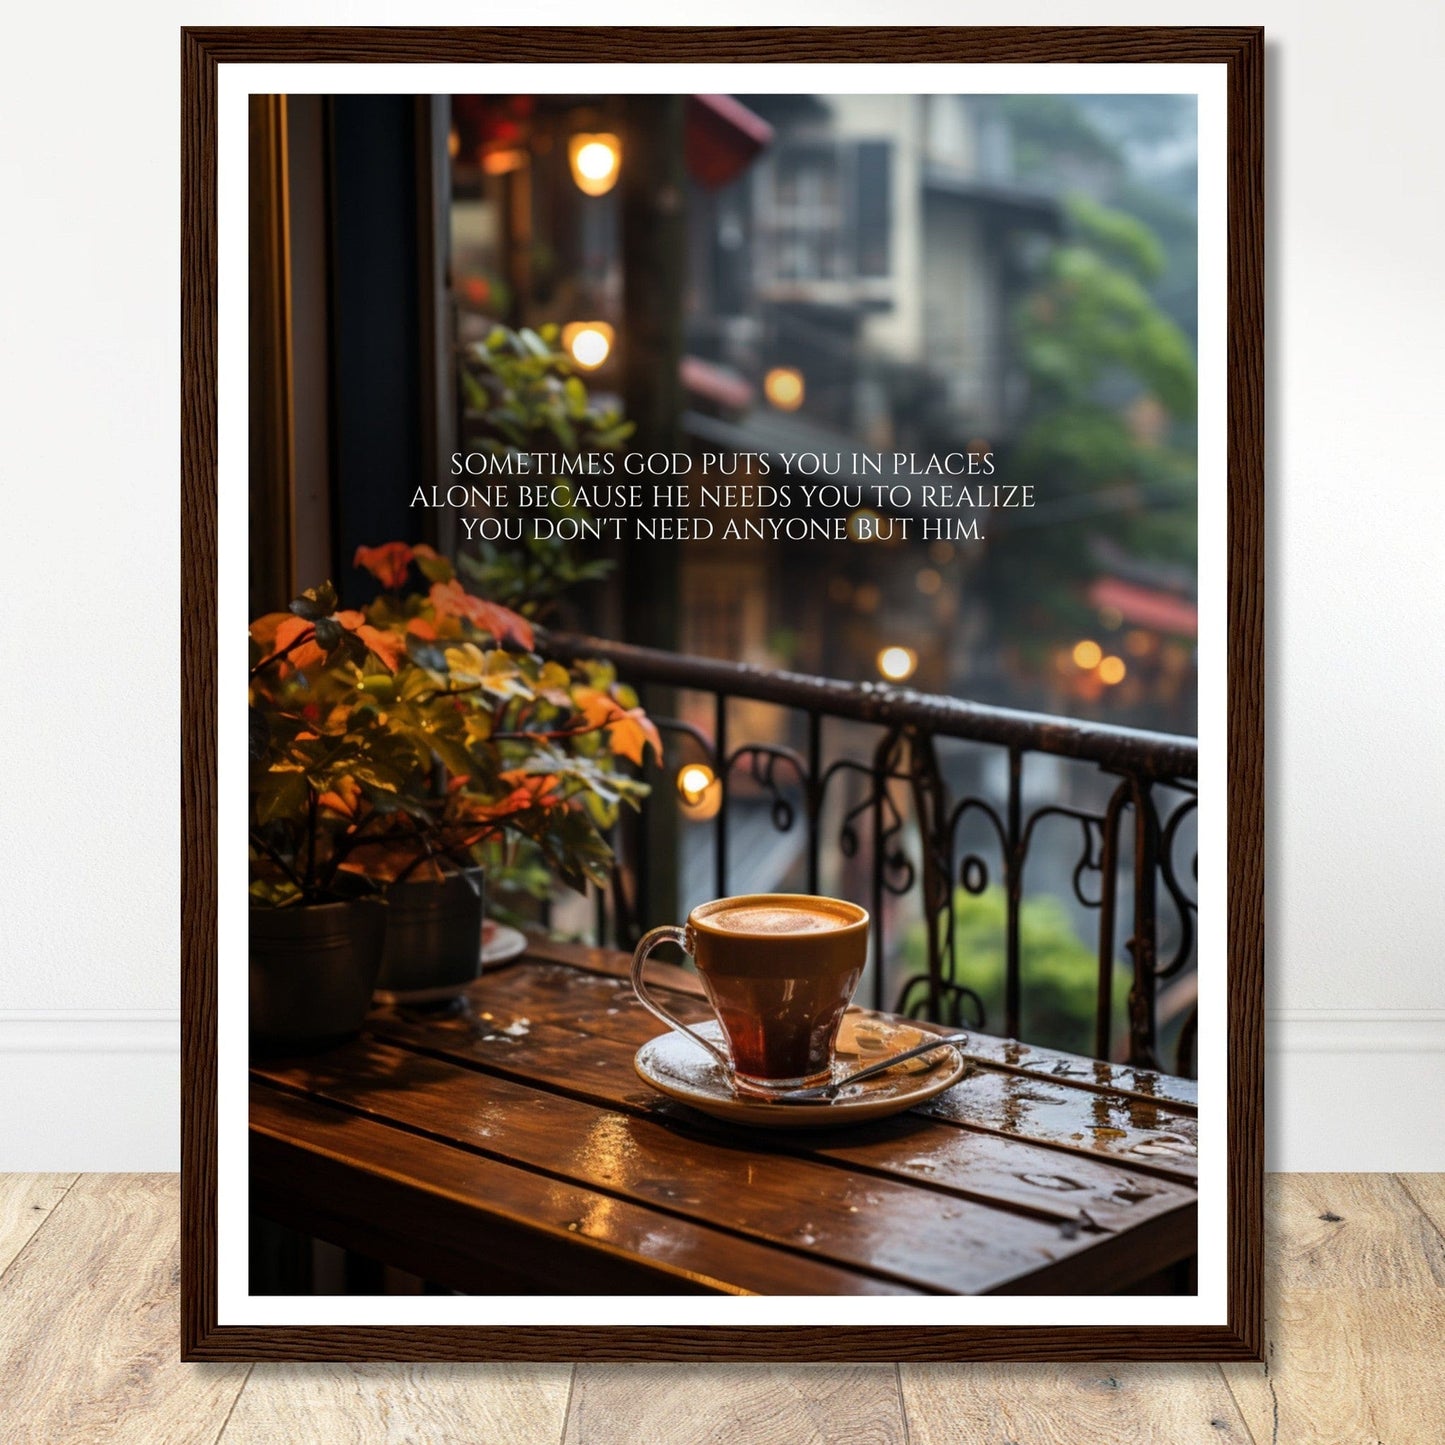 Coffee With My Father Print Material 40x50 cm / 16x20″ / Dark wood frame Premium Matte Paper Wooden Framed Poster